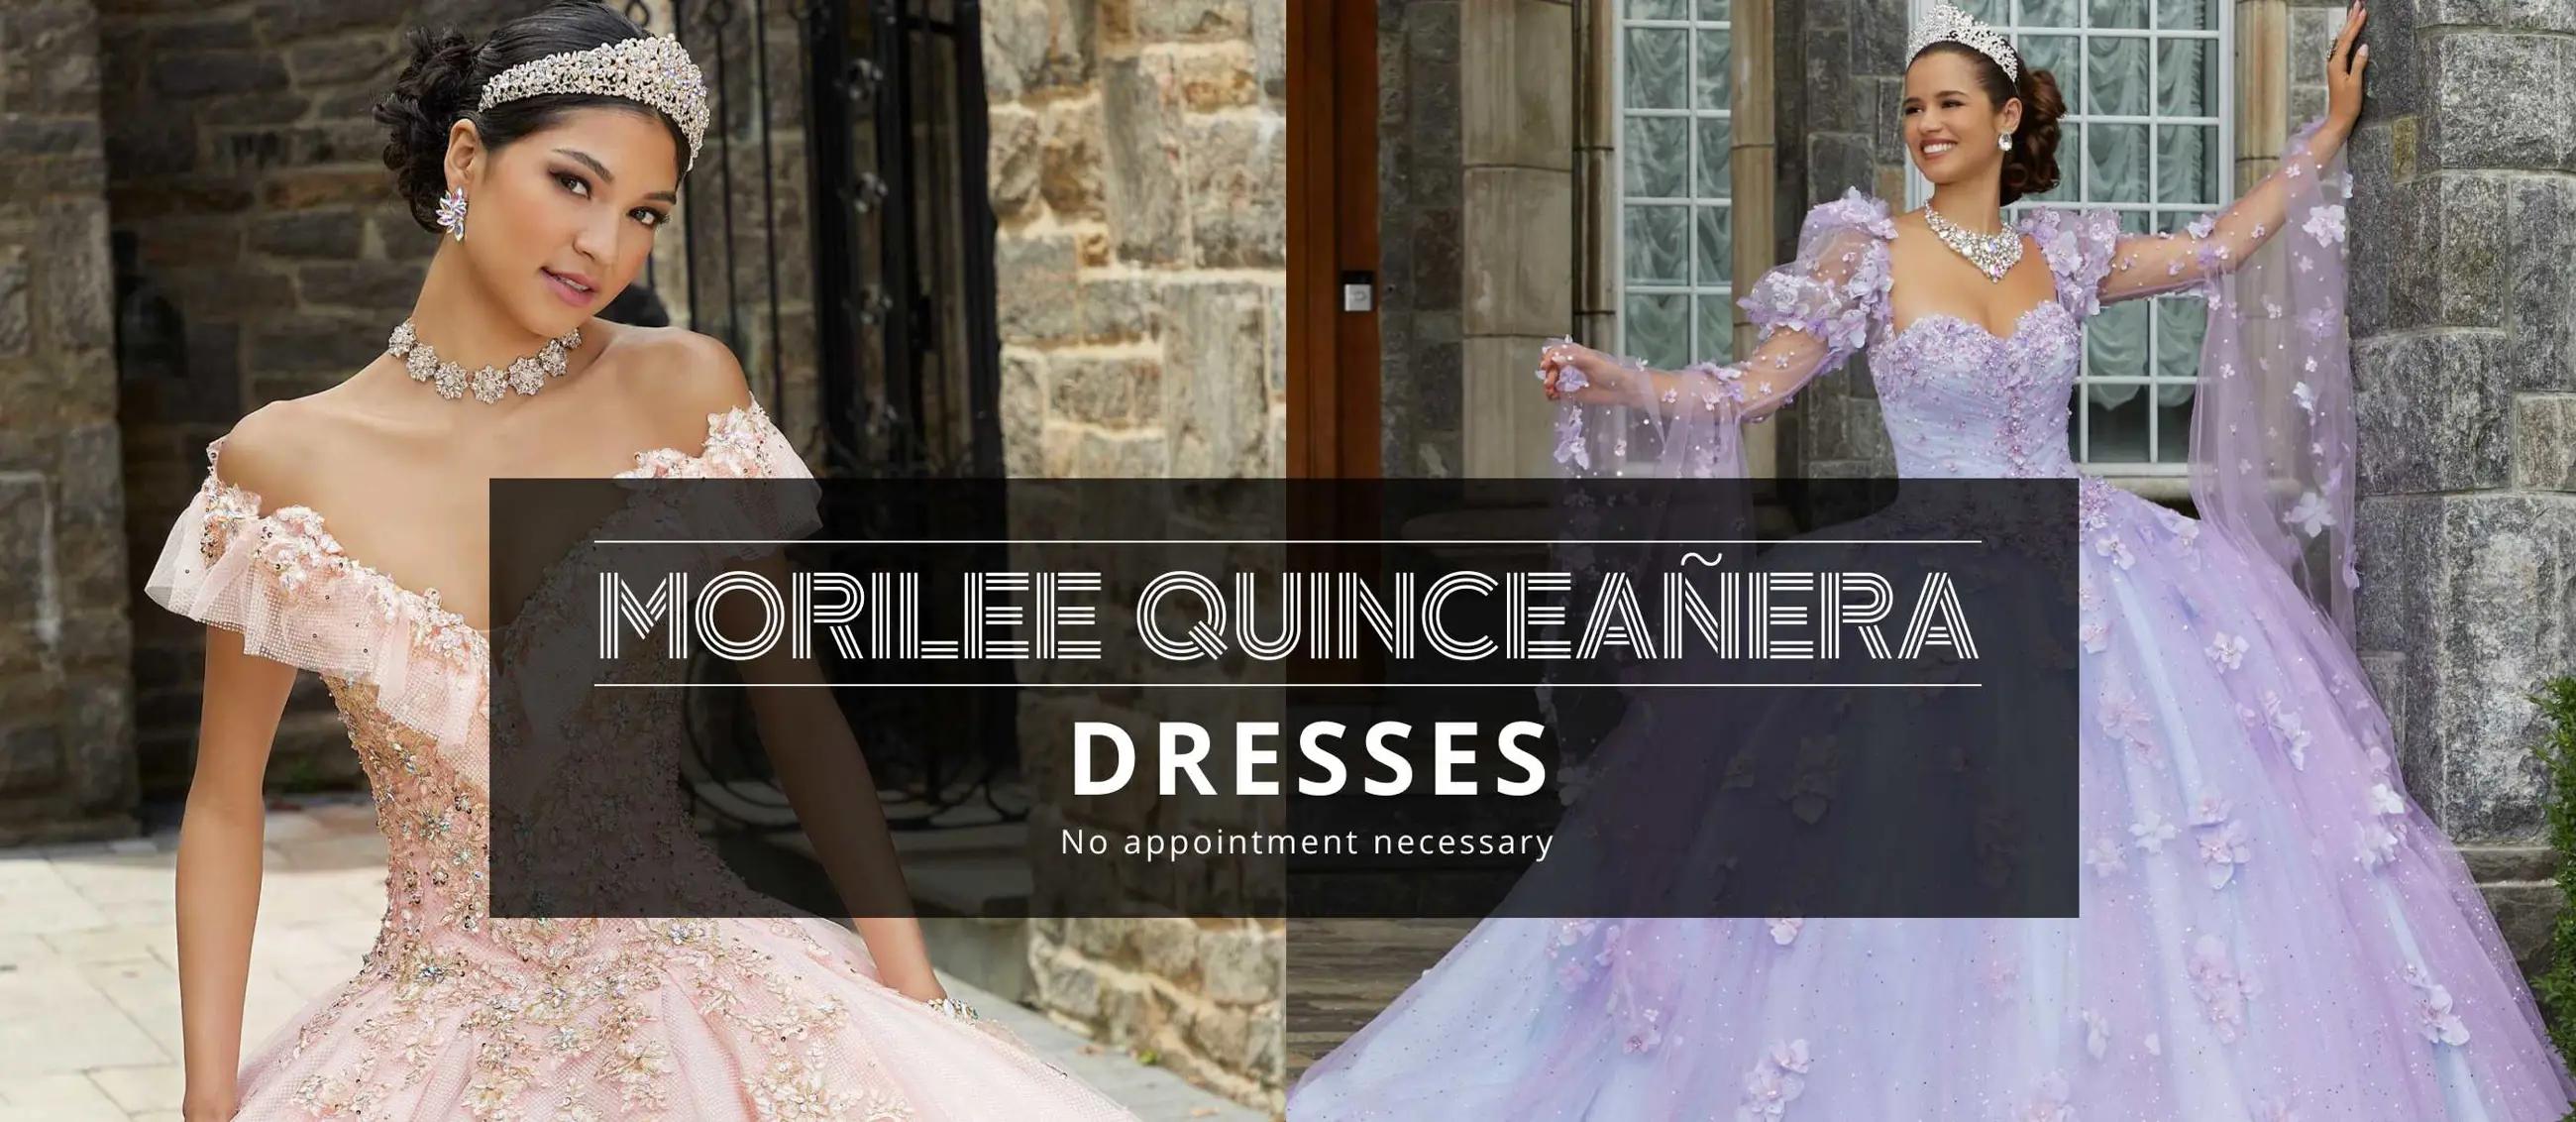 Morilee Quinceañera Dresses at Trudys Prom. Models wearing quinceañera dresses. Desktop image.